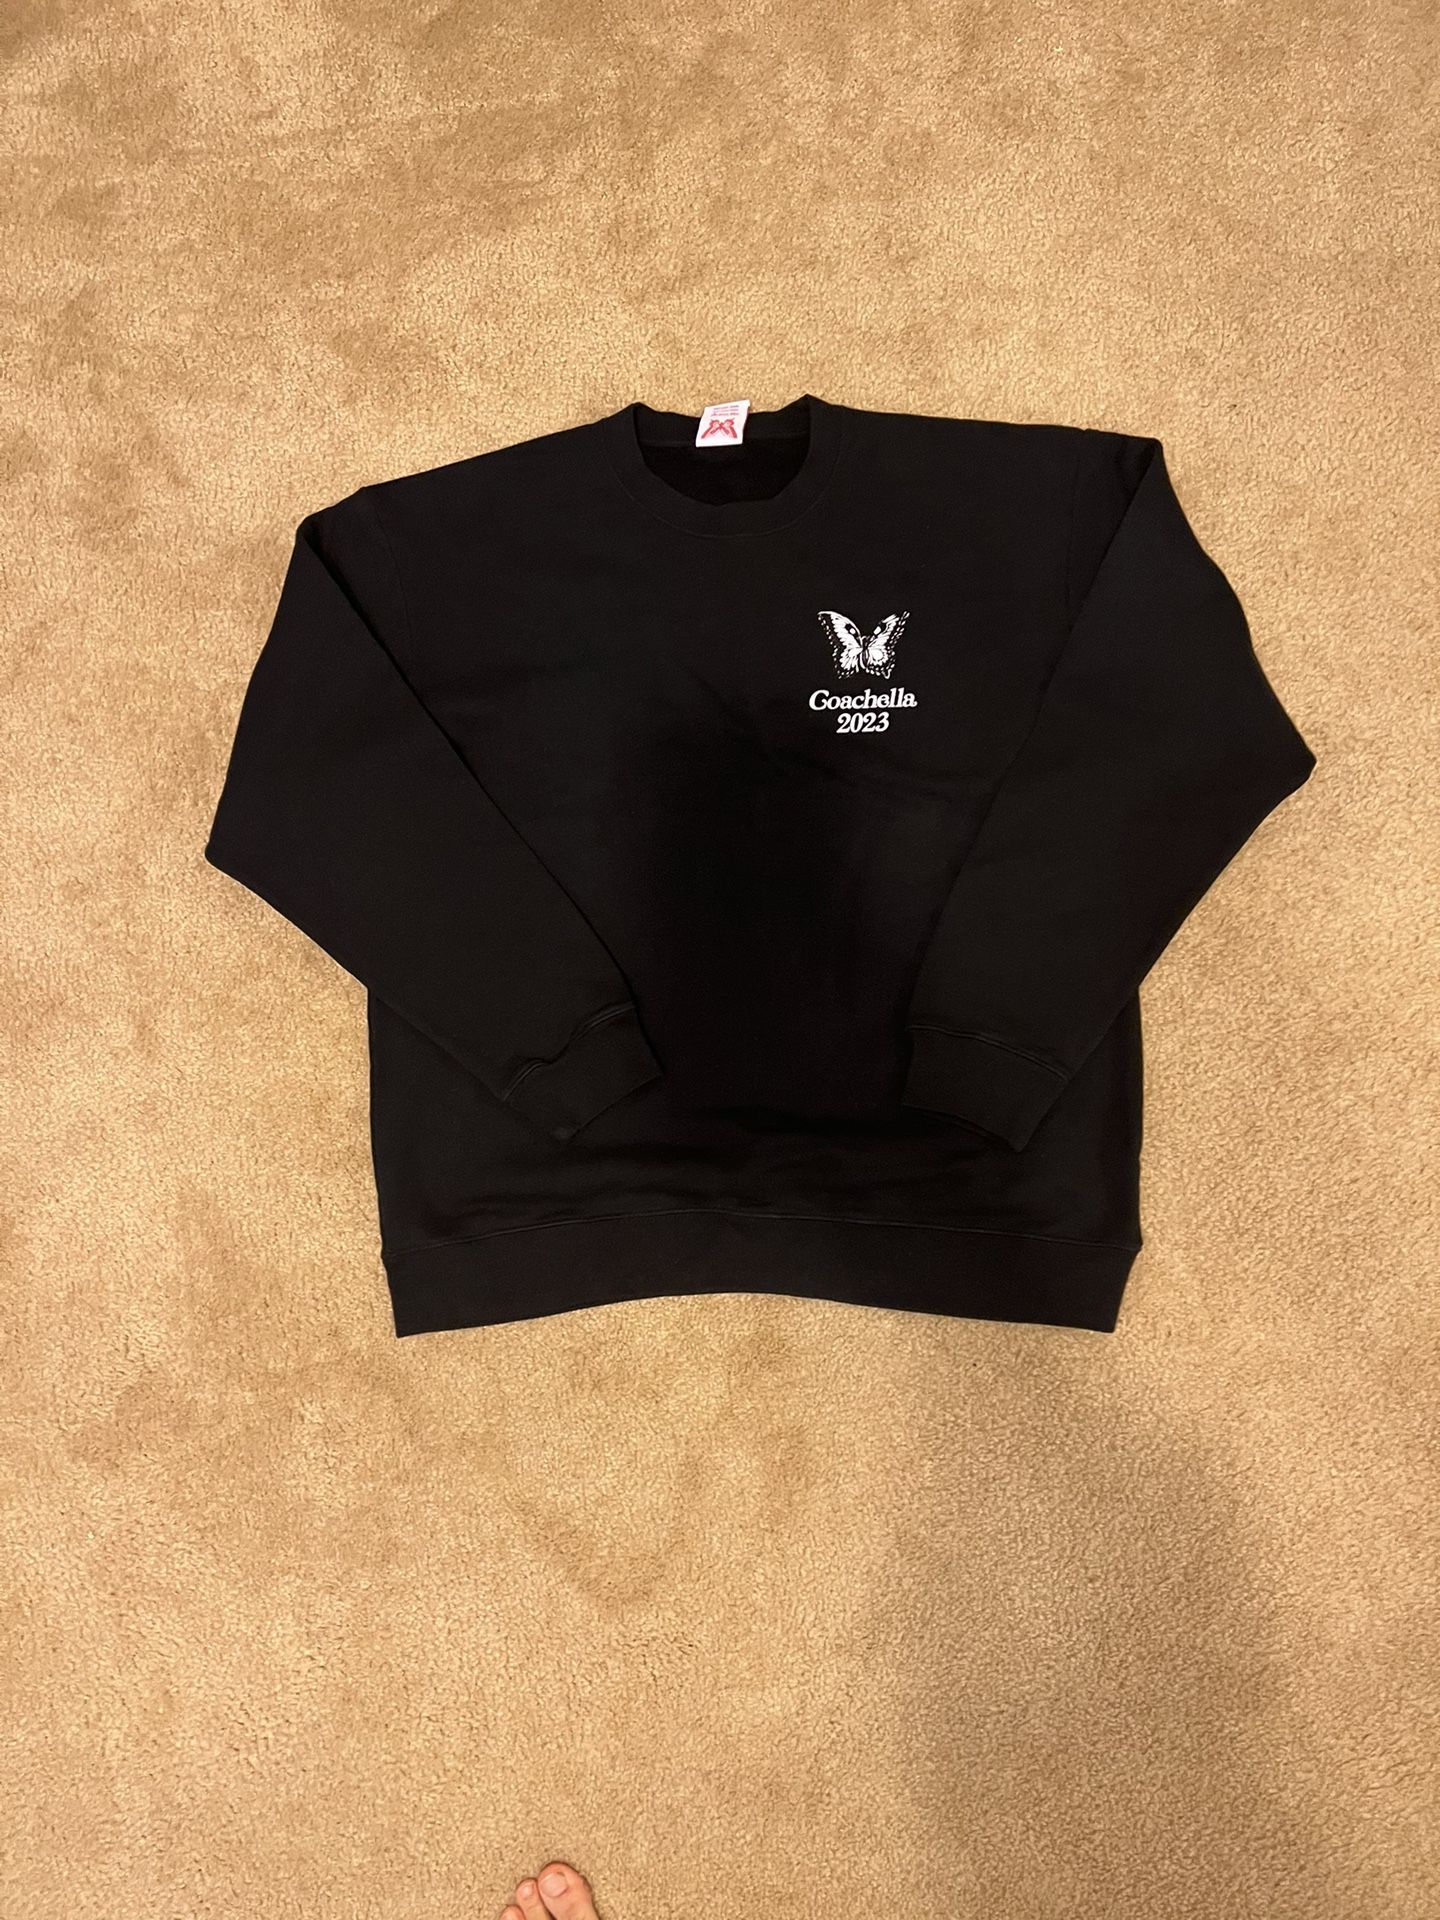 Verdy Coachella Weekend 1 Exclusive Crewneck Girls Don't Cry